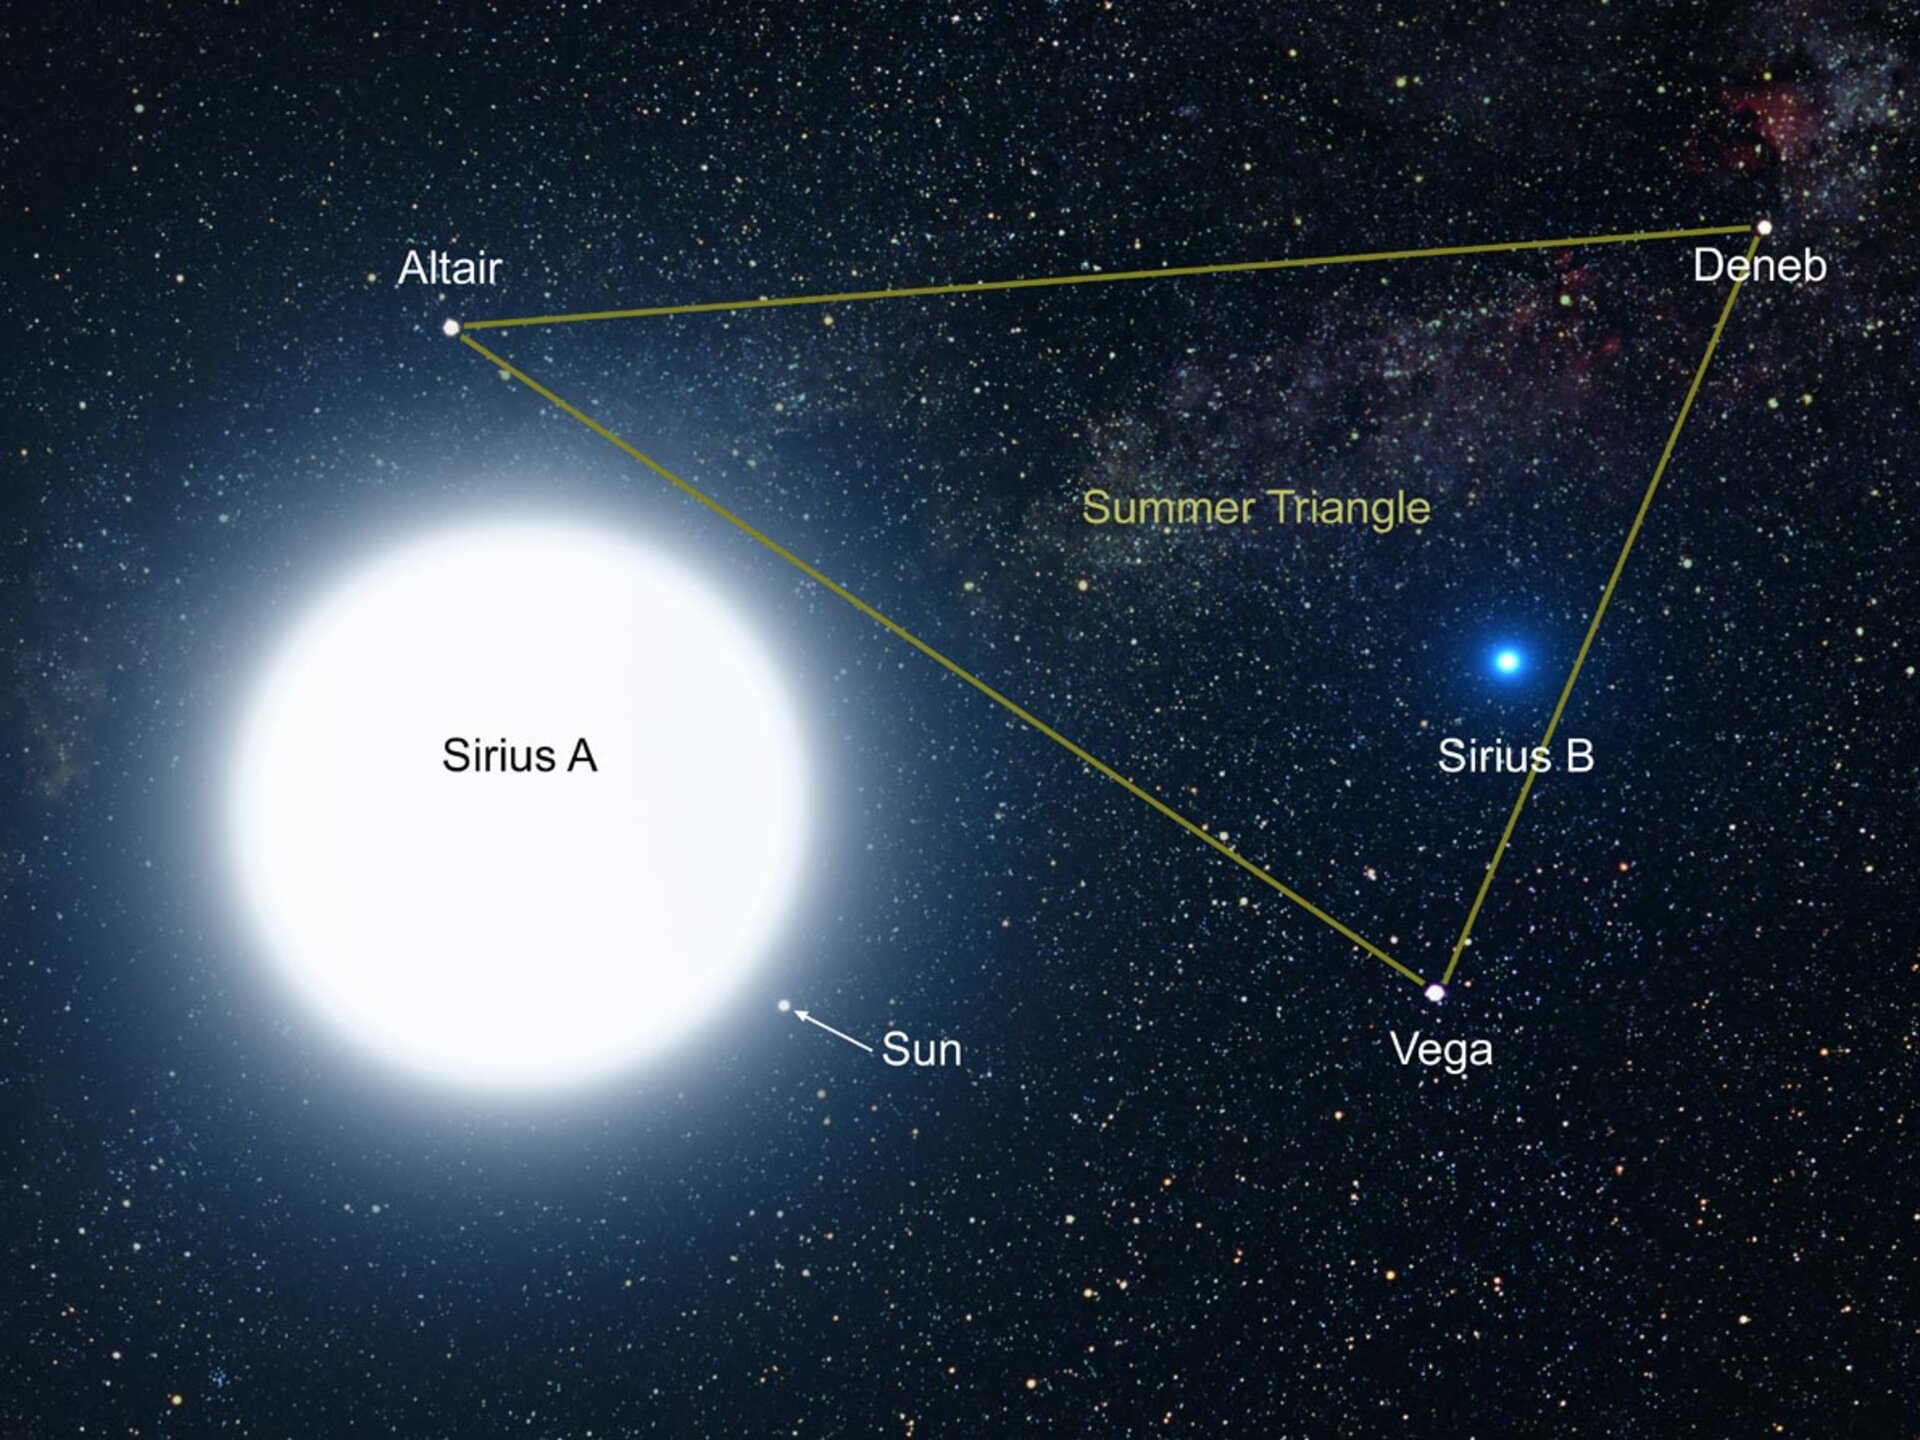 Esa Artists Impression Of Sirius A And B Viewed From Within Their